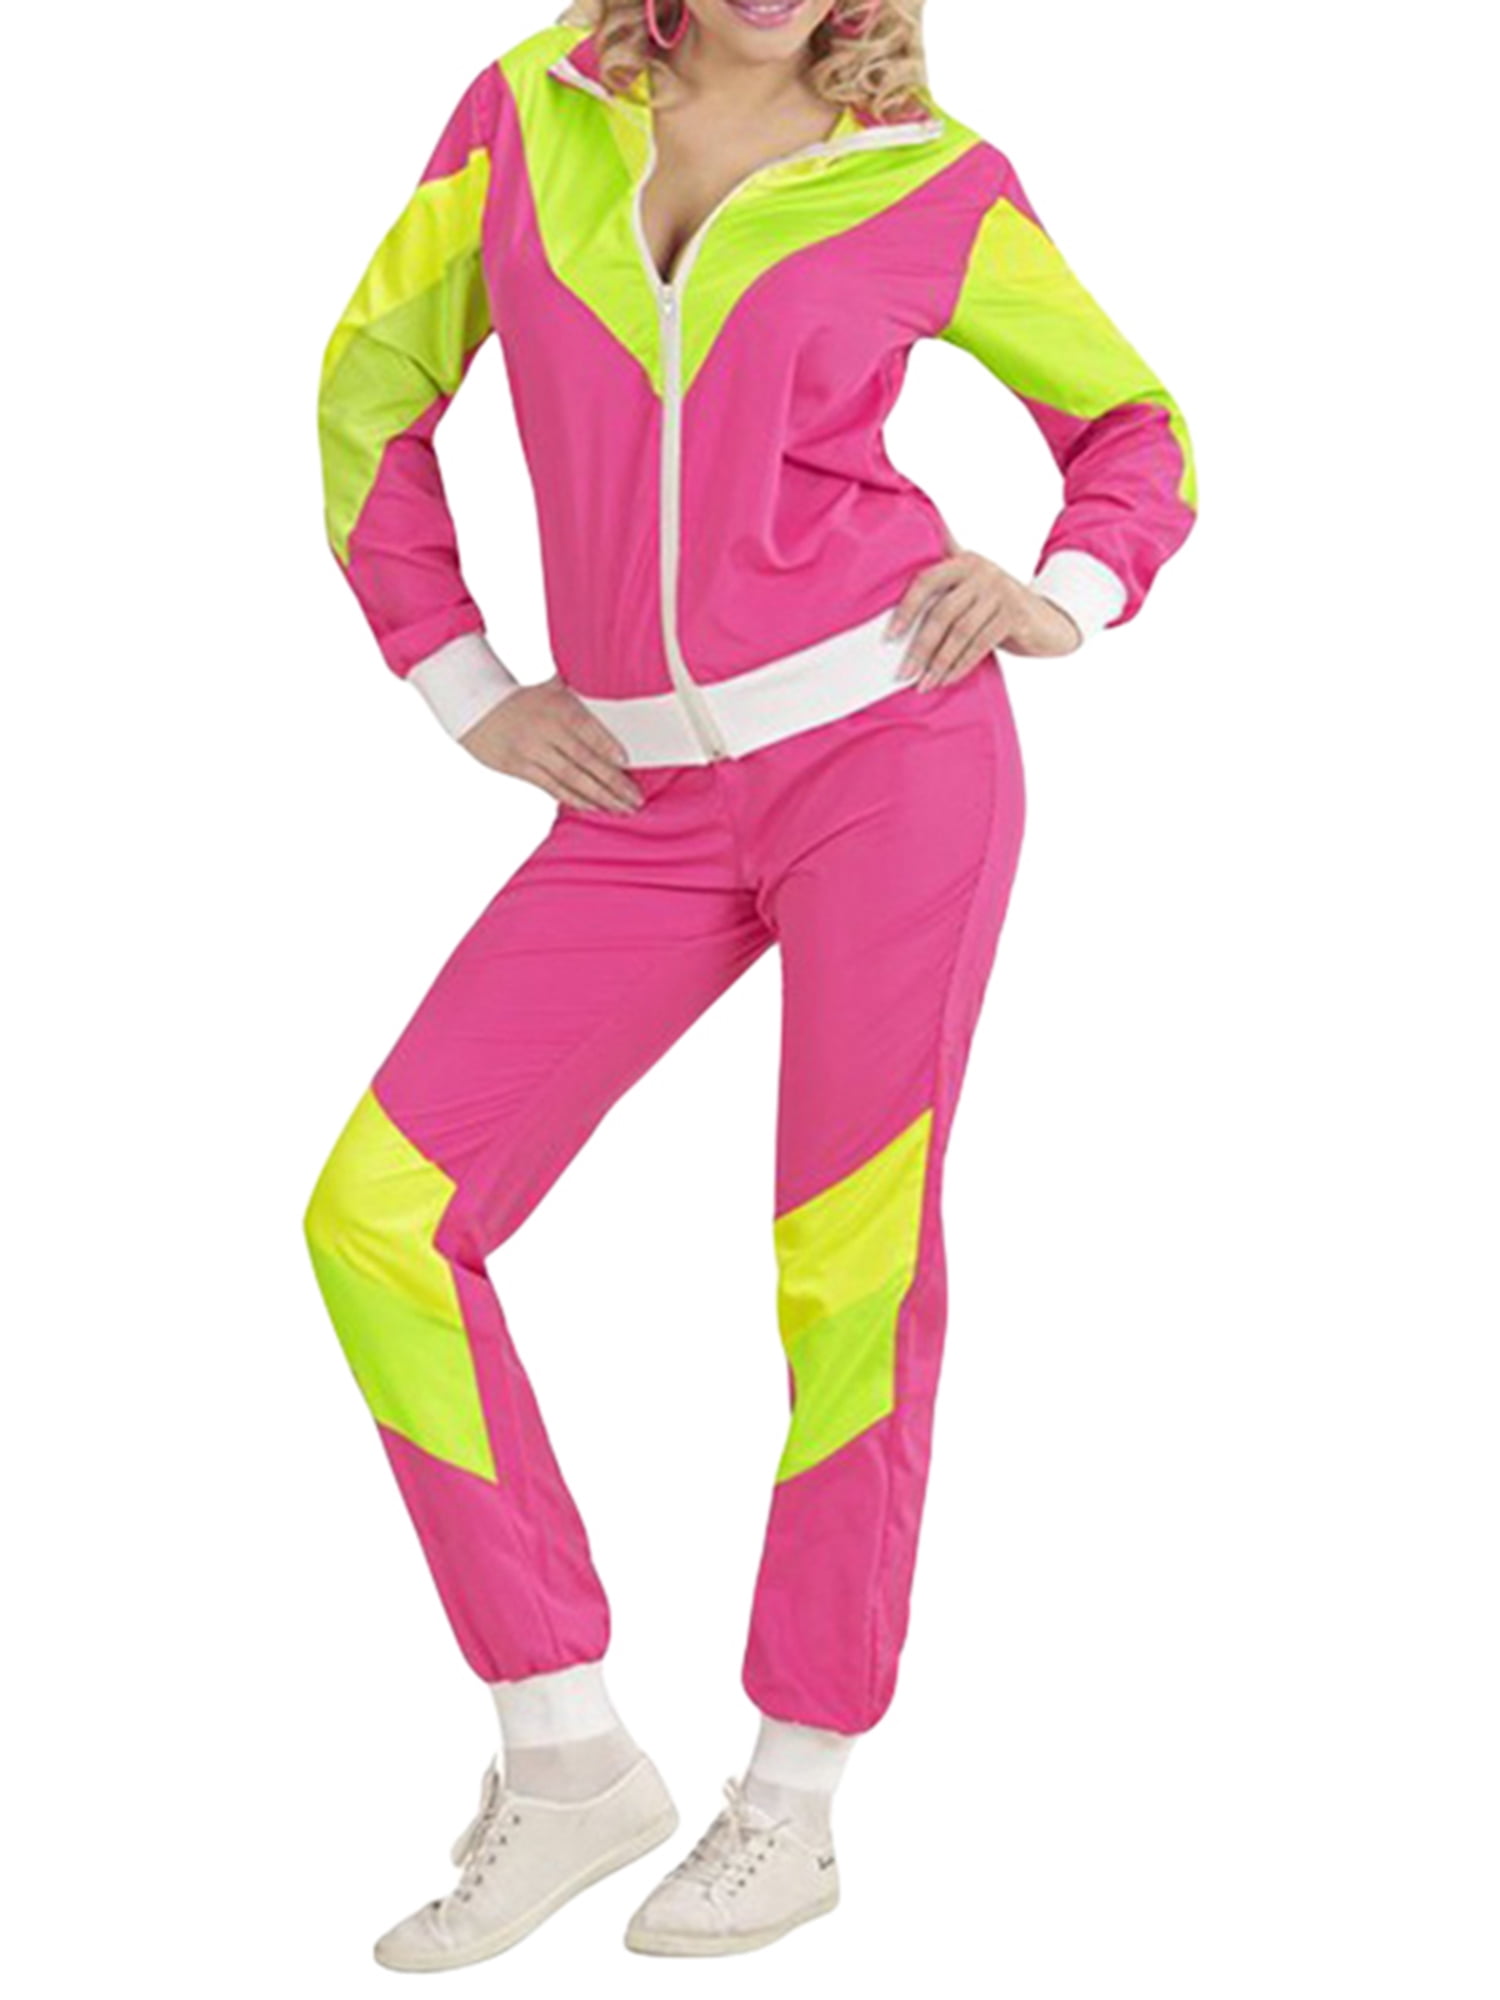 Cathery Women Men 80s/90s Tracksuit Outfits Color Block, 55% OFF